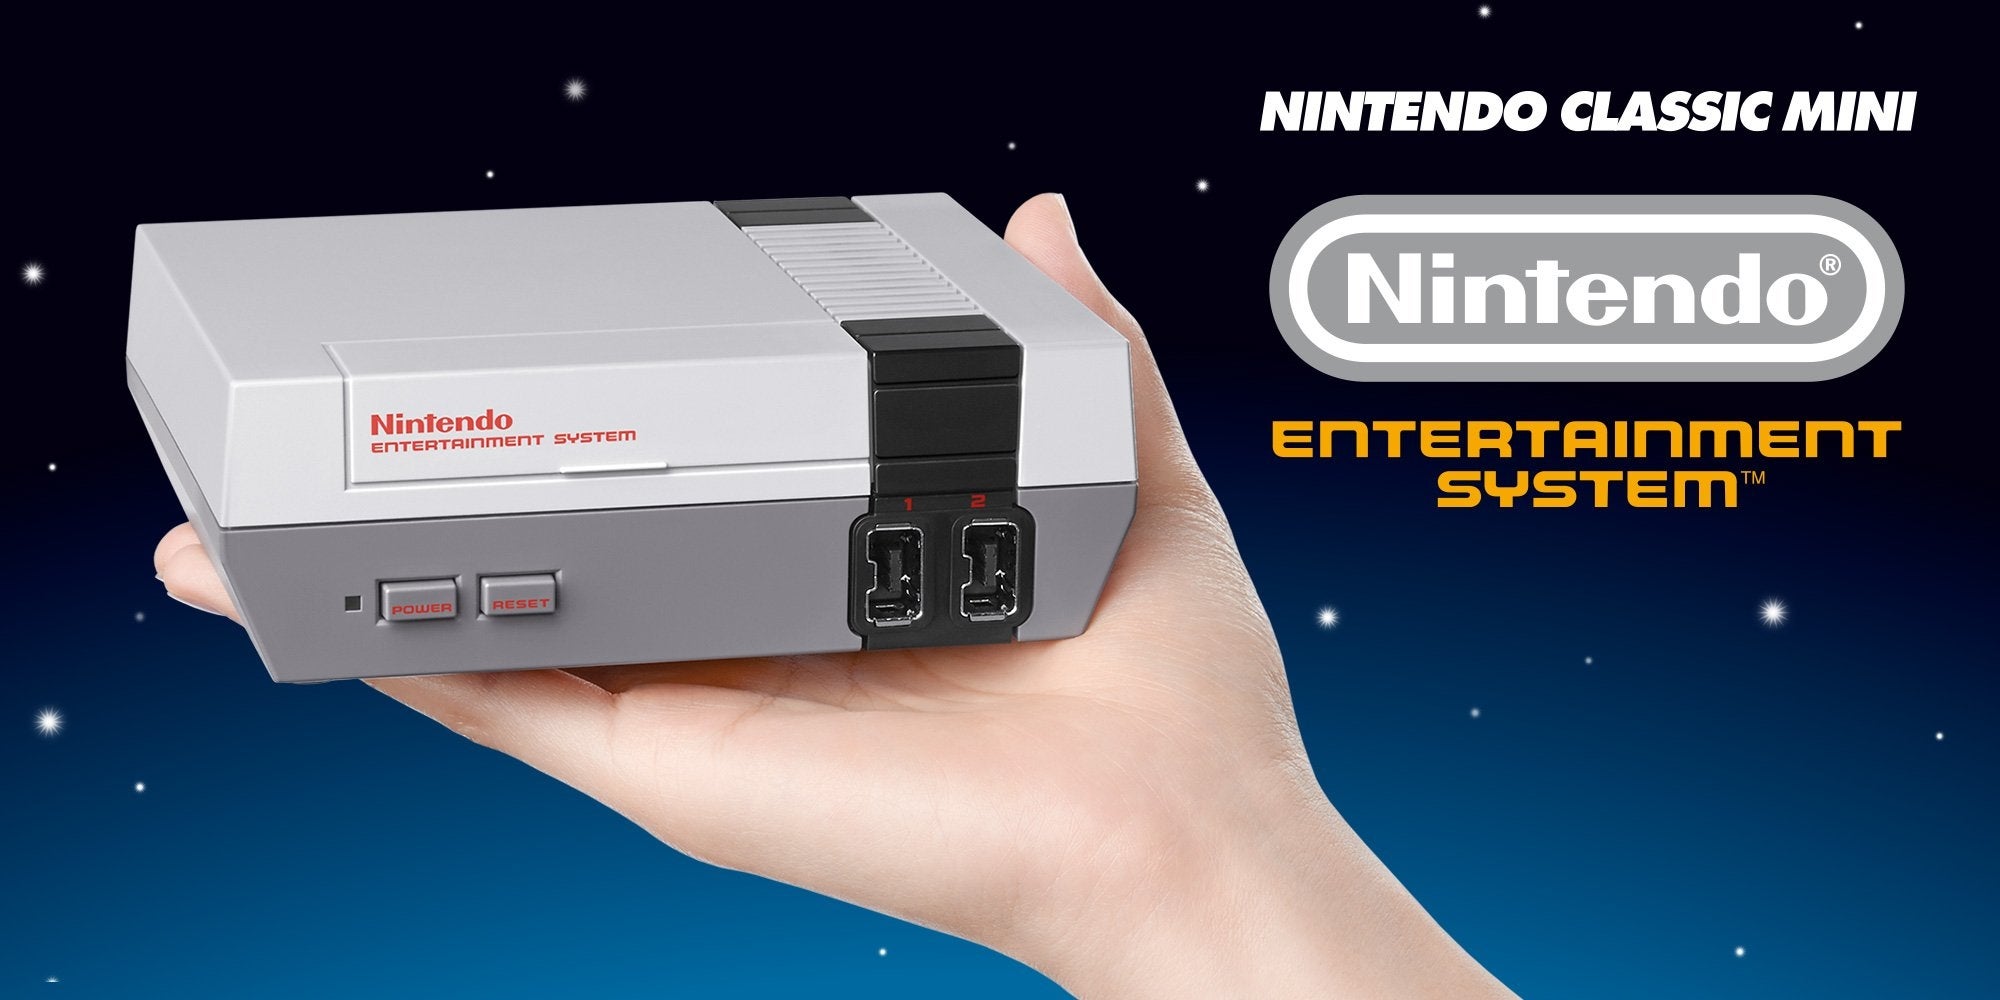 Riding the Pokemon Go wave, Nintendo unveils the NES Classic Mini, a console for reliving the 1980s